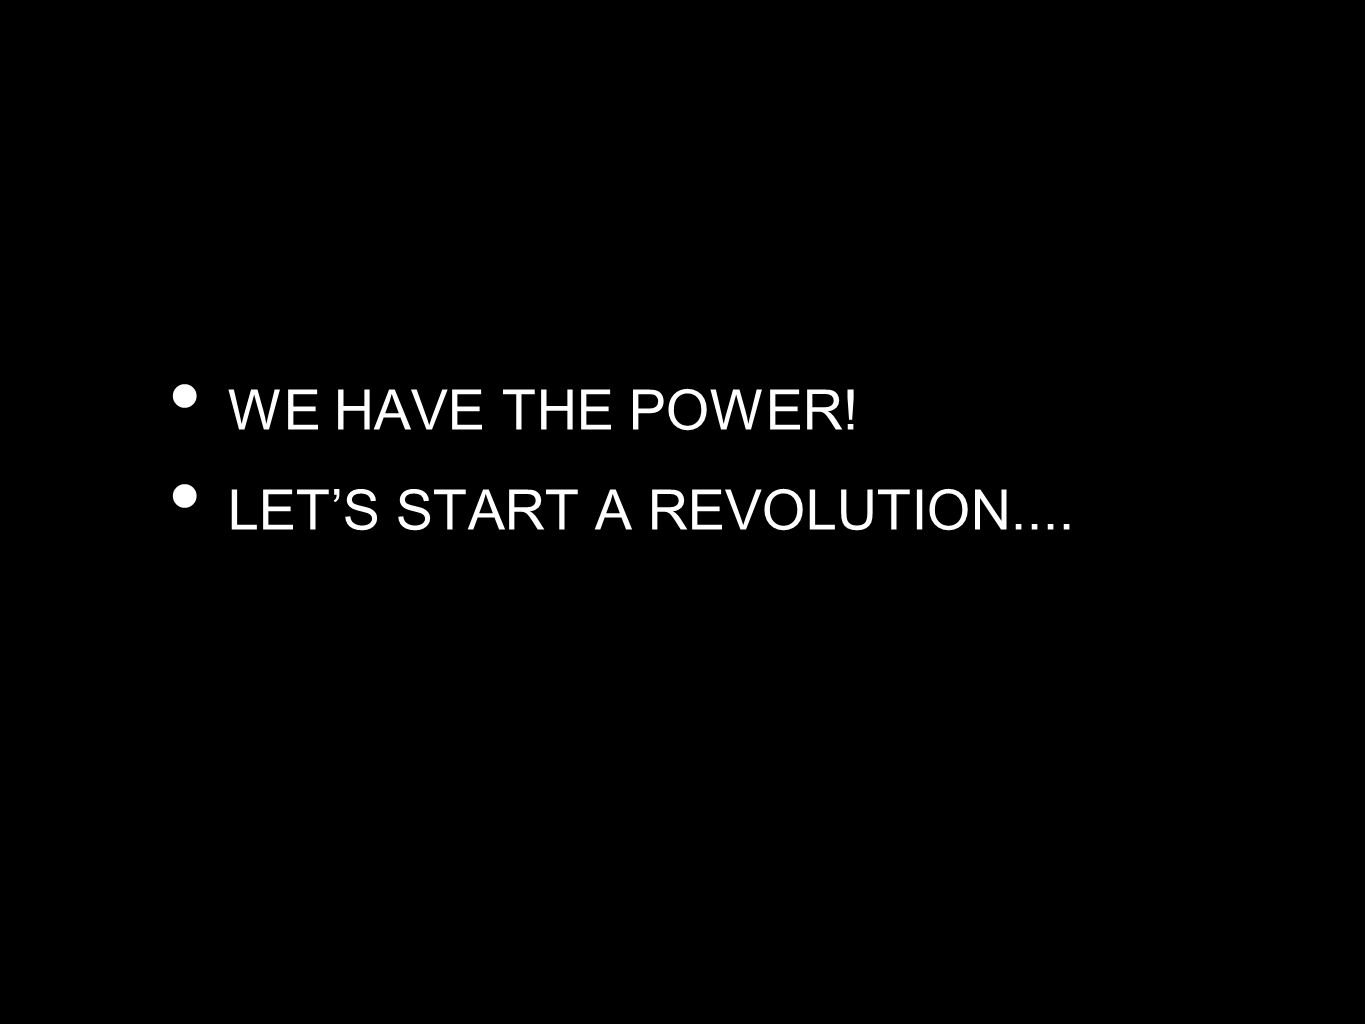 WE HAVE THE POWER! LET’S START A REVOLUTION....